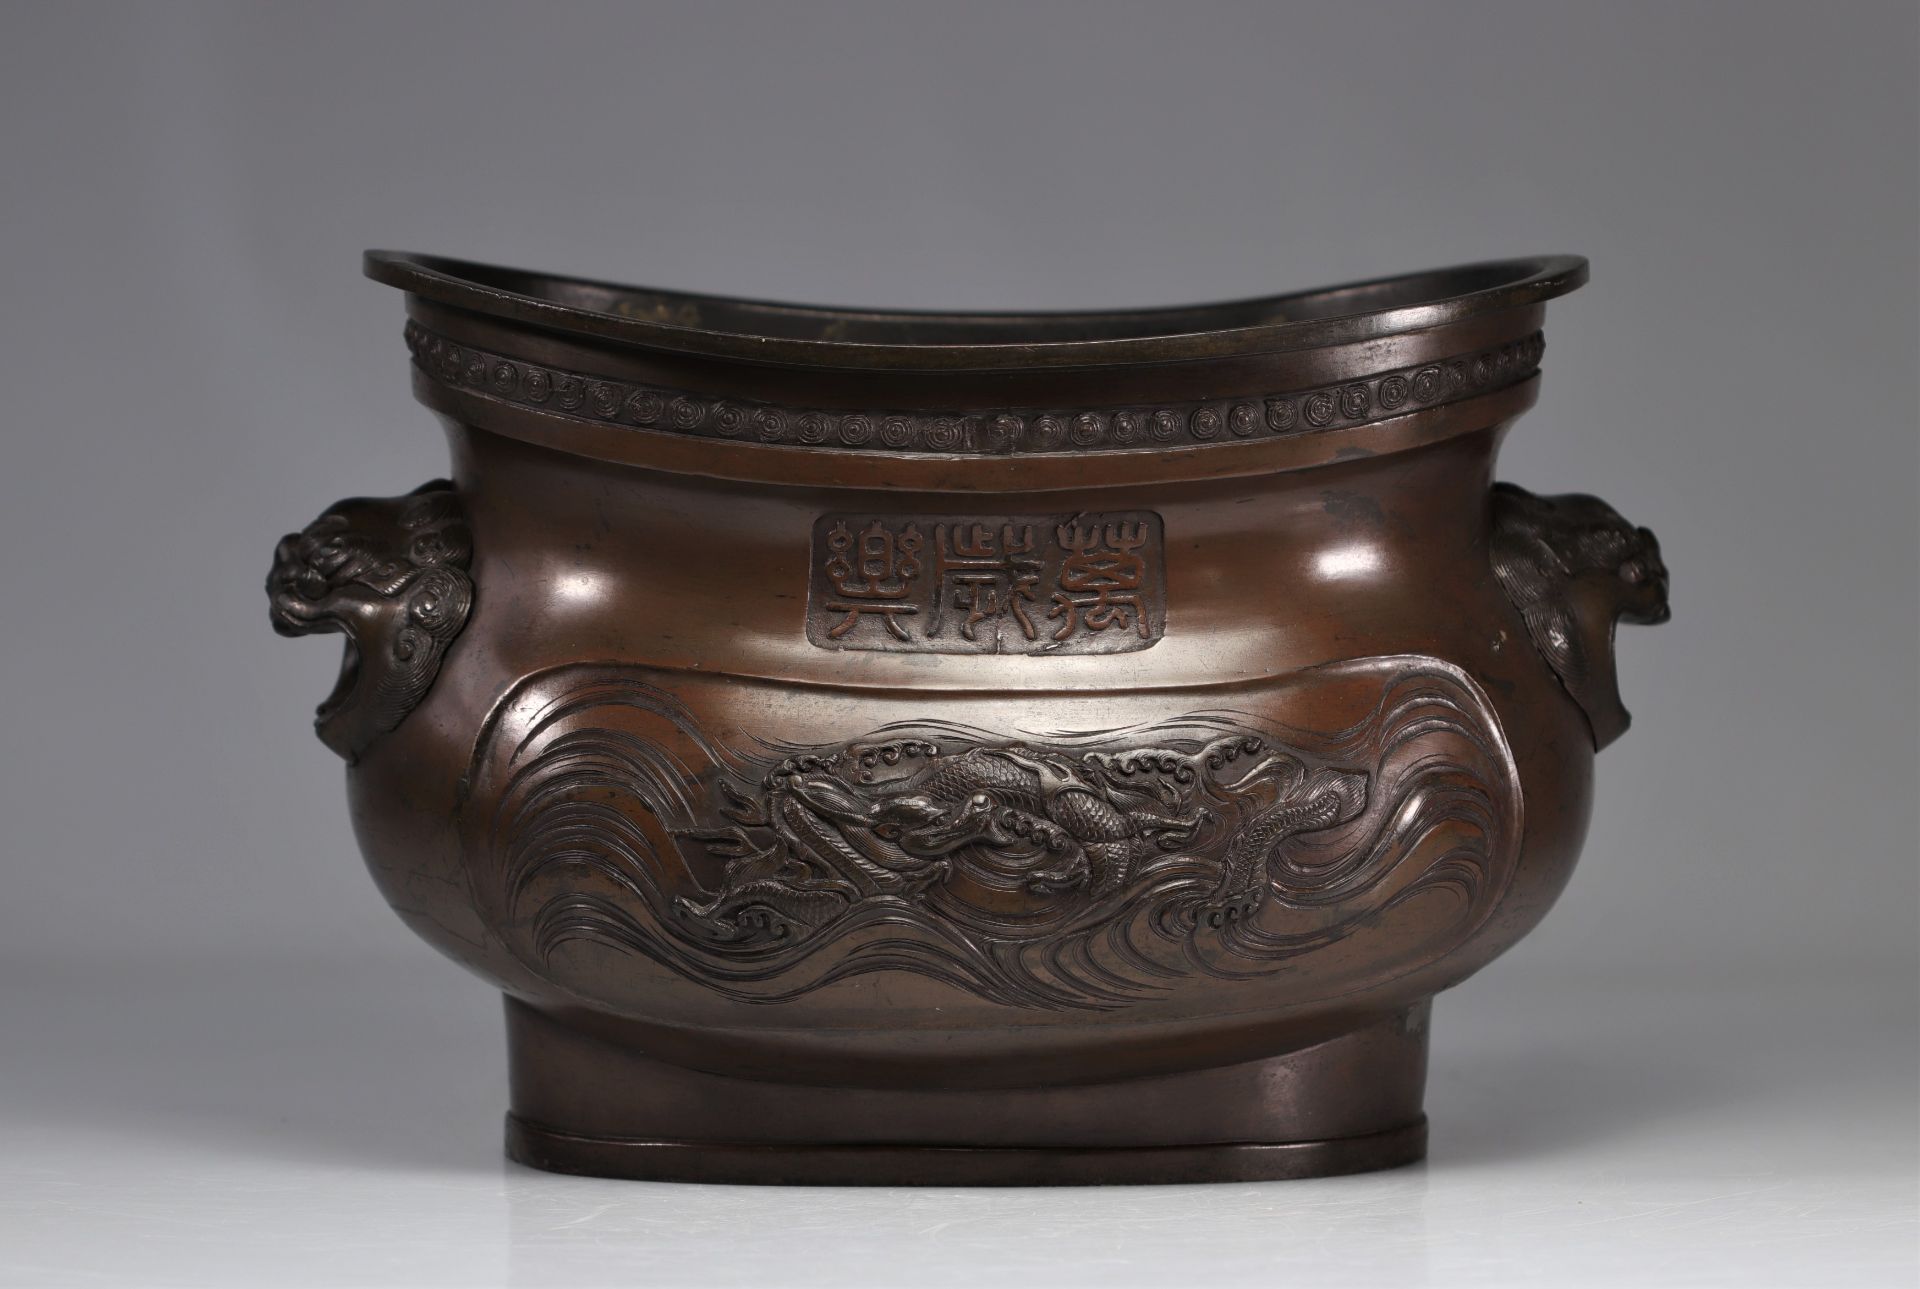 Japanese bronze planter decorated with dragons from 19th century - Image 3 of 5